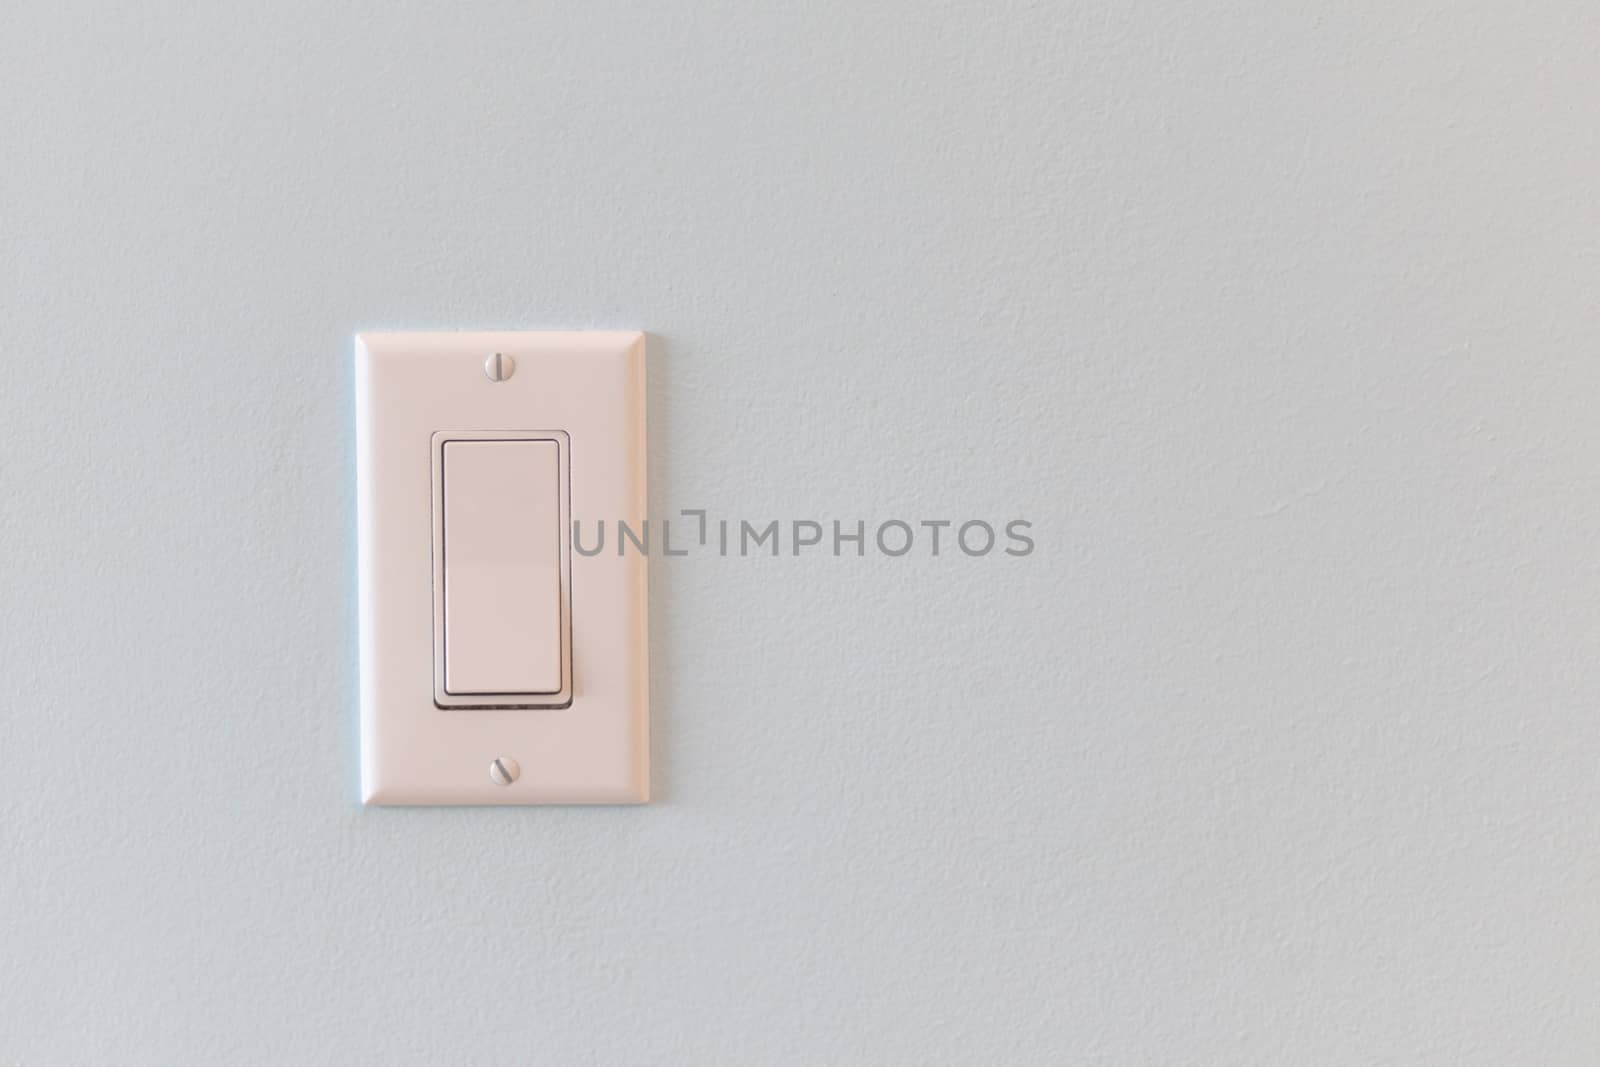 A light switch with a flat panel rocker design is on a wall in a house.